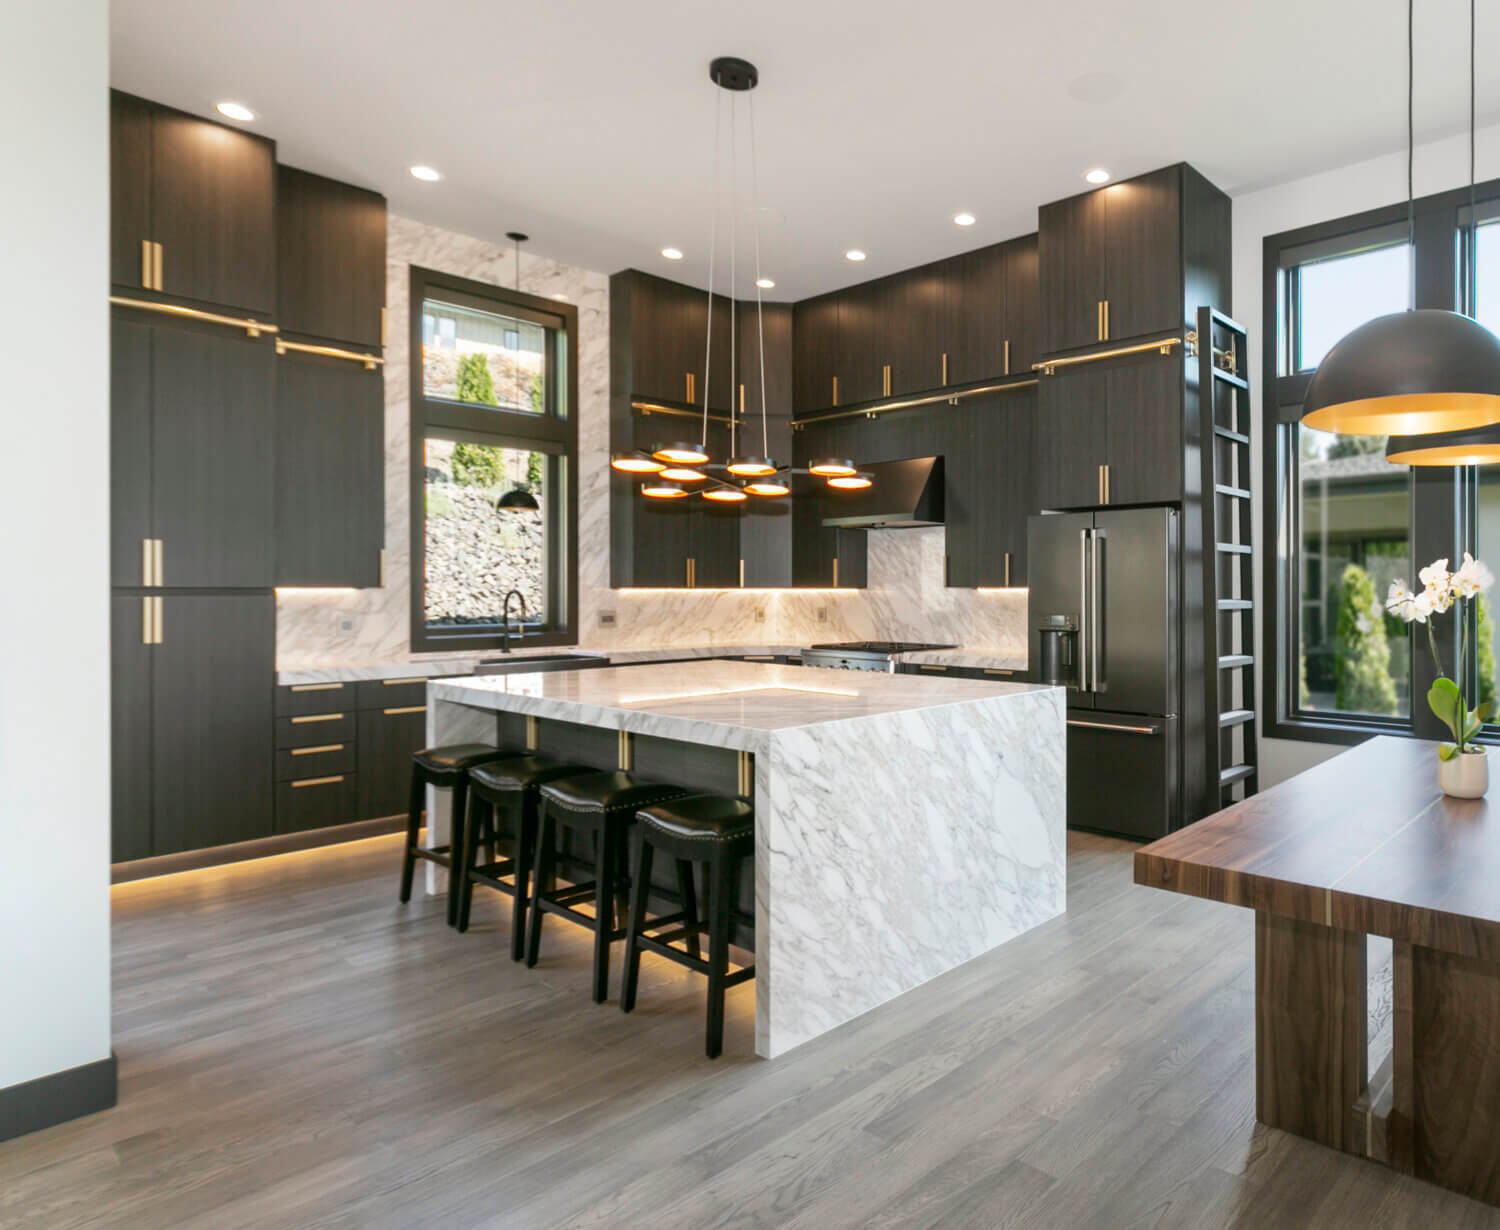 An ultra modern kitchen with contemporary black textured cabinets from Dura Supreme with futuristic lighting details and a wide waterfall kitchen island.